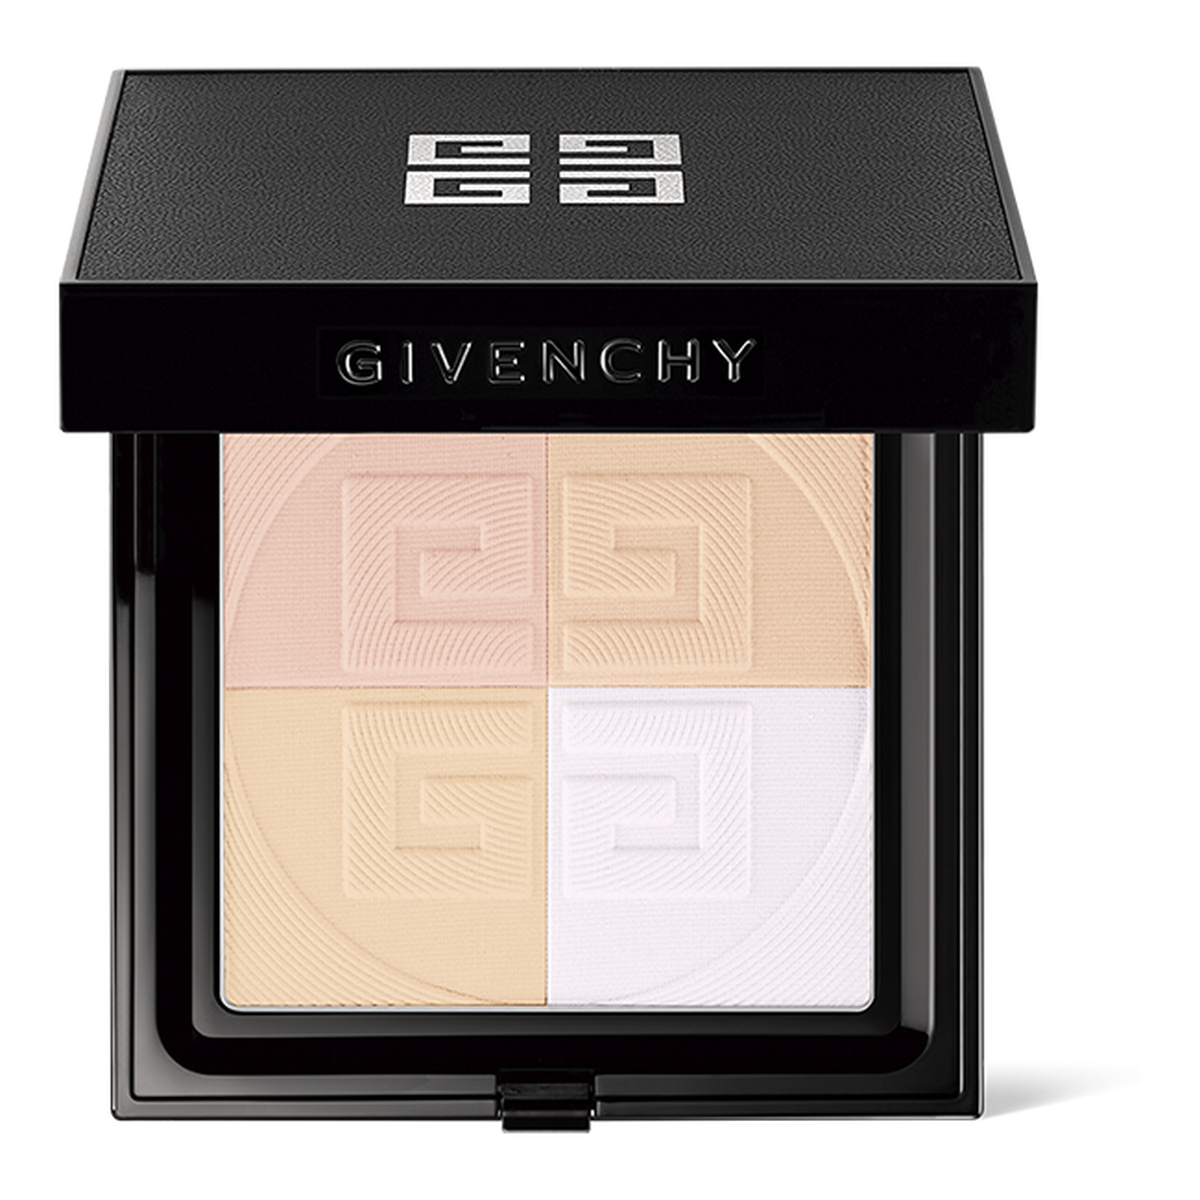 Top 56+ imagen givenchy pressed powder